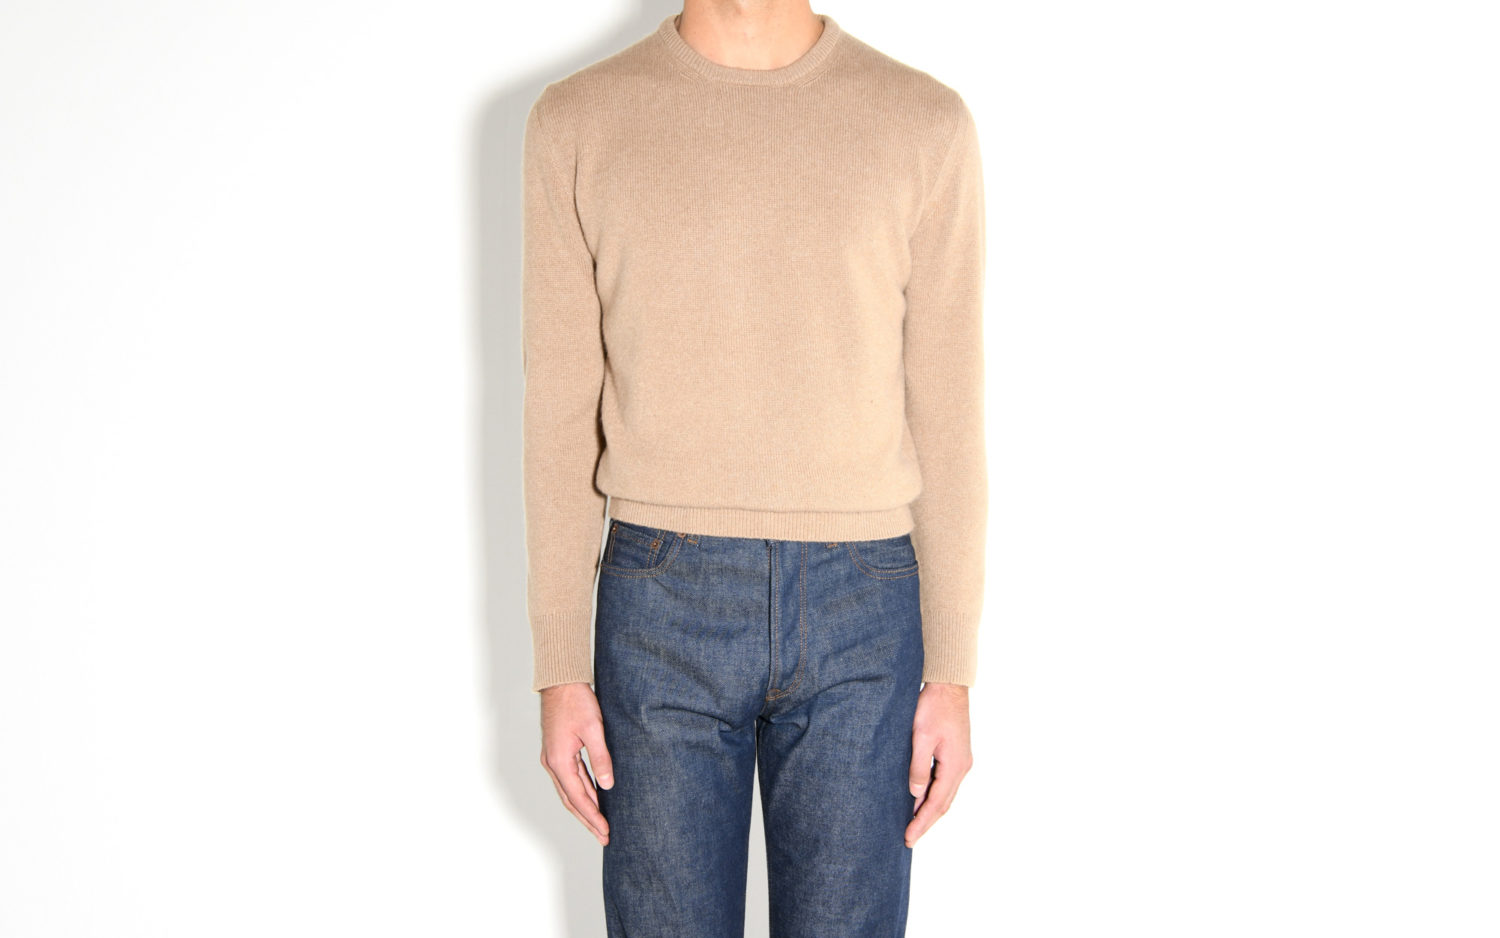 crew neck sweater cashmere camel front